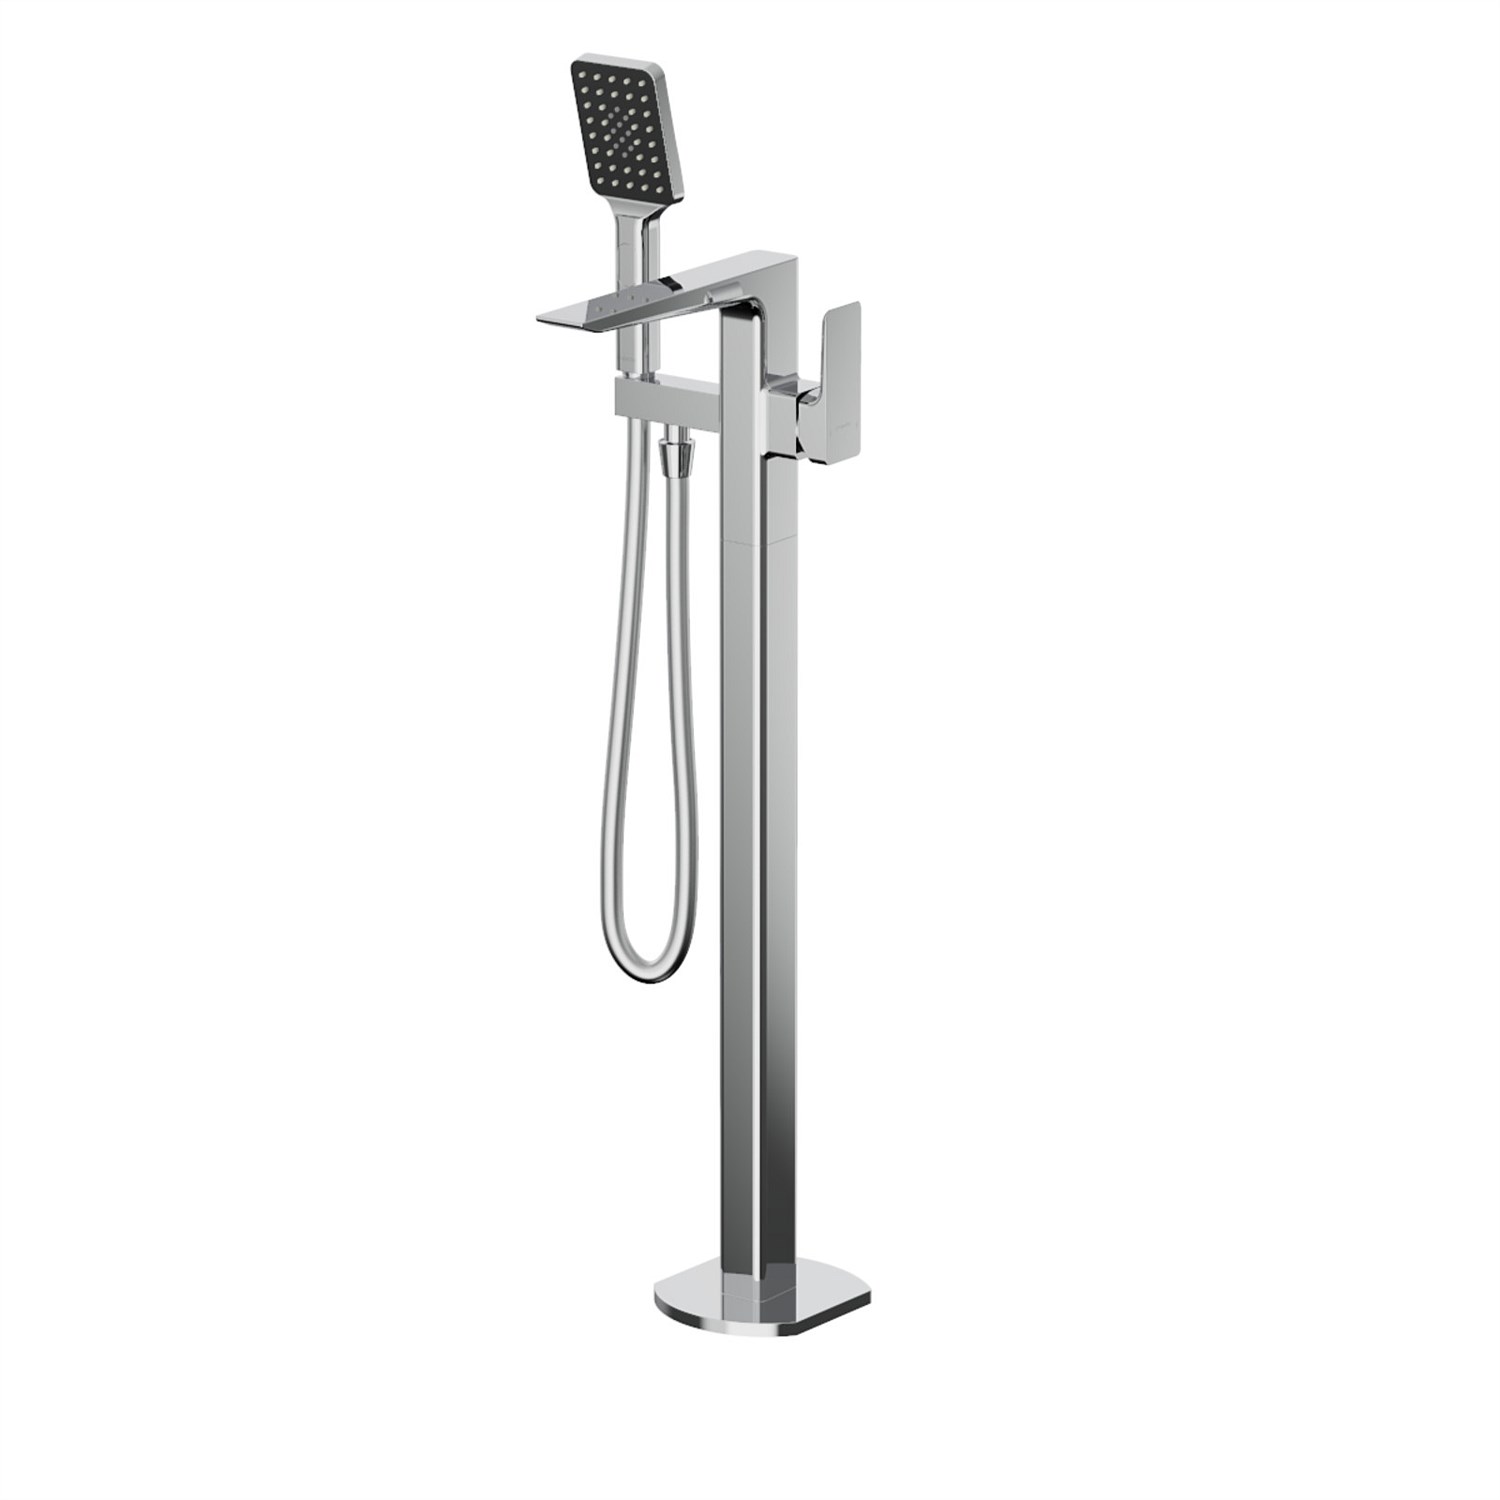 Bath the Chrome Floor Bathroom Handshower Mounted Tapware Filler - with Latest Venice Progetto Shop